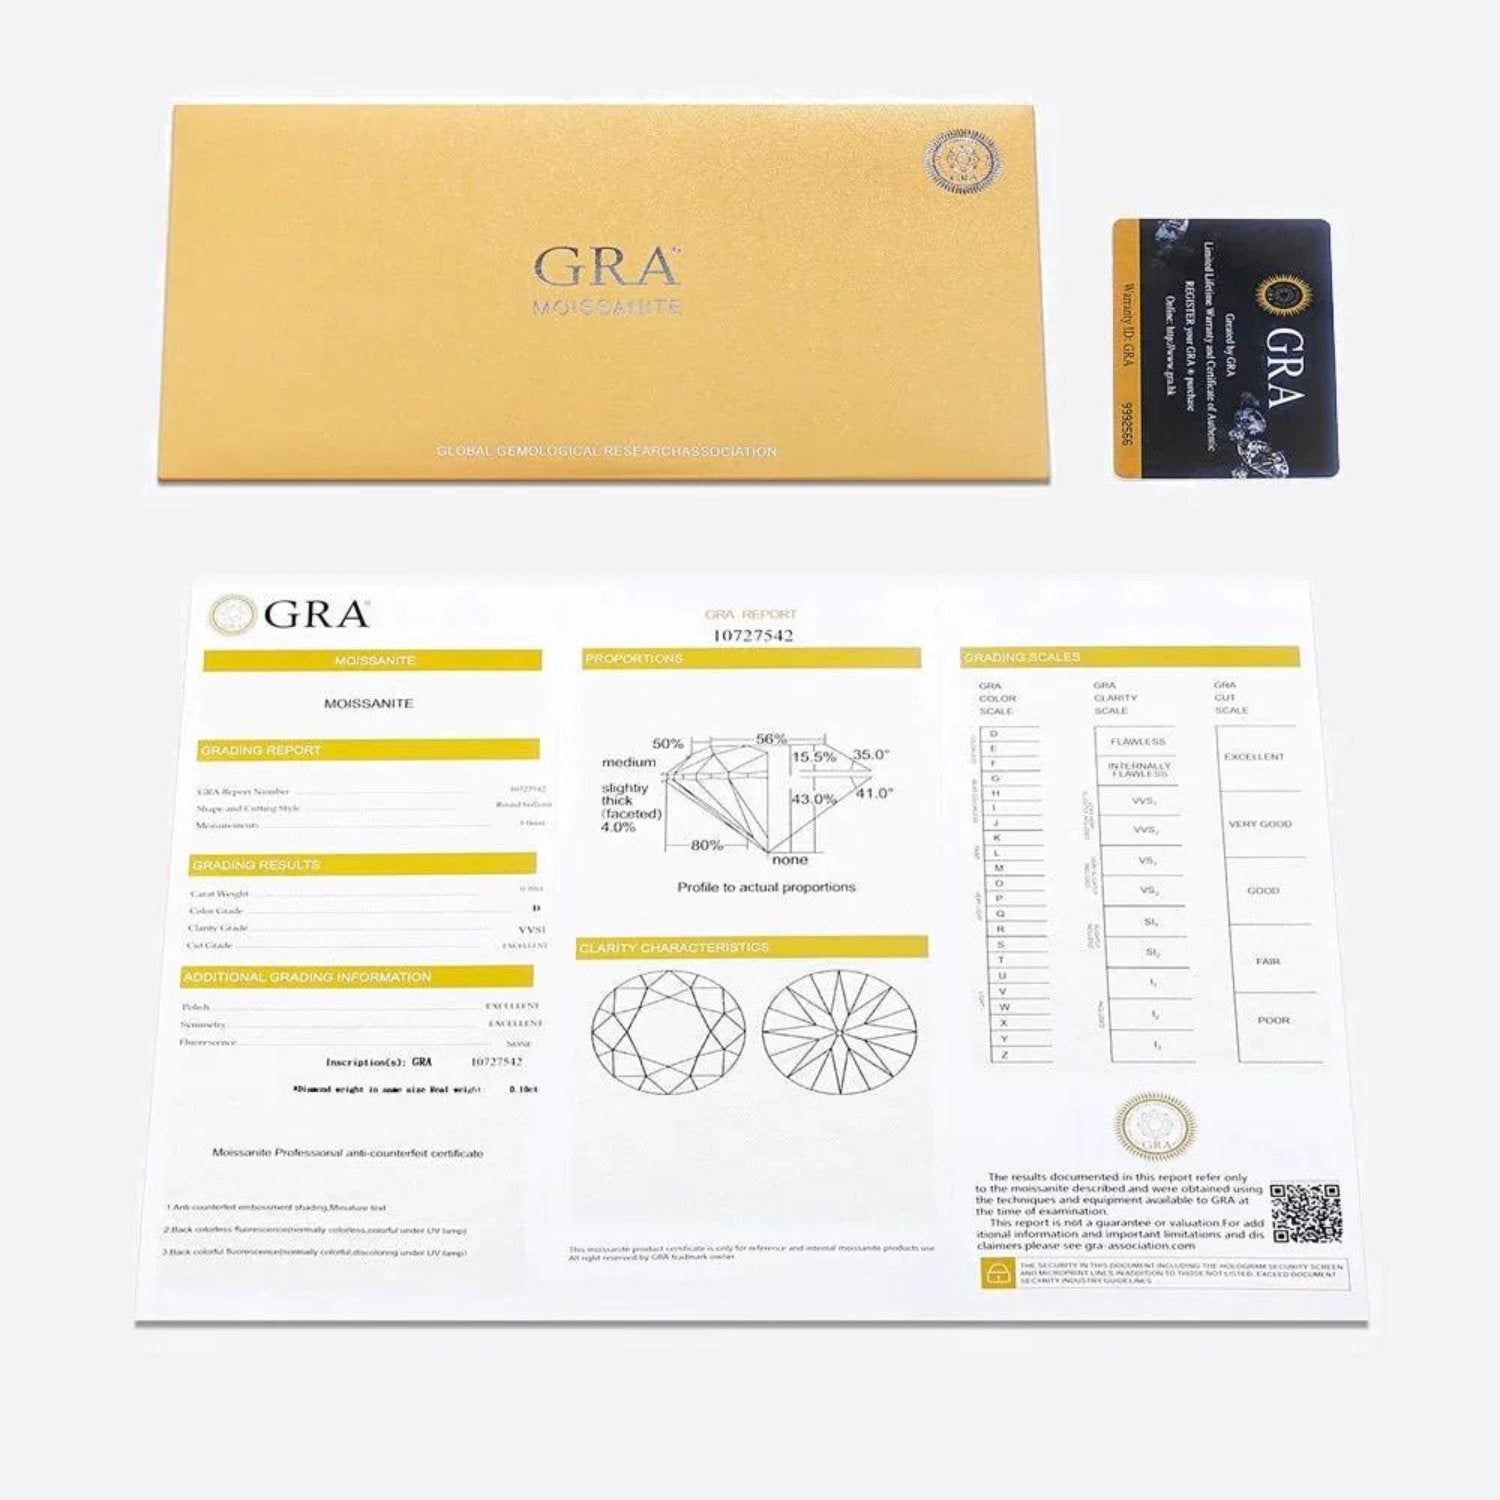 GRA certificate and authentication